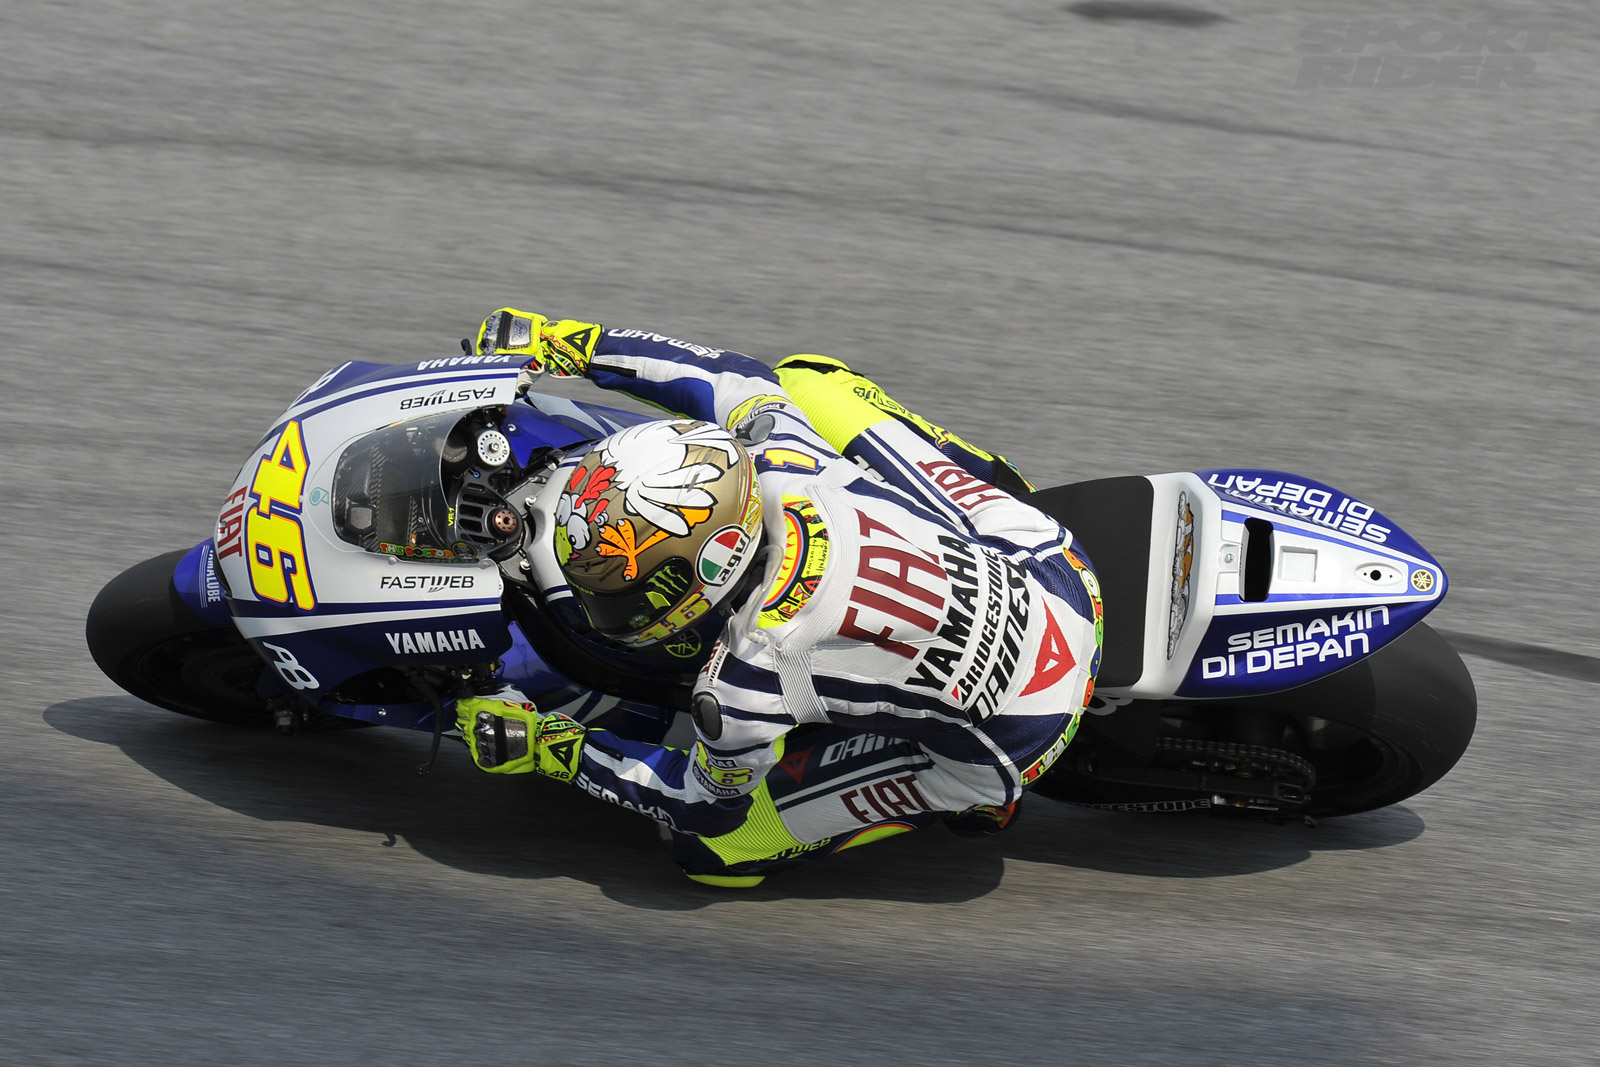 Rossi: I just want a win